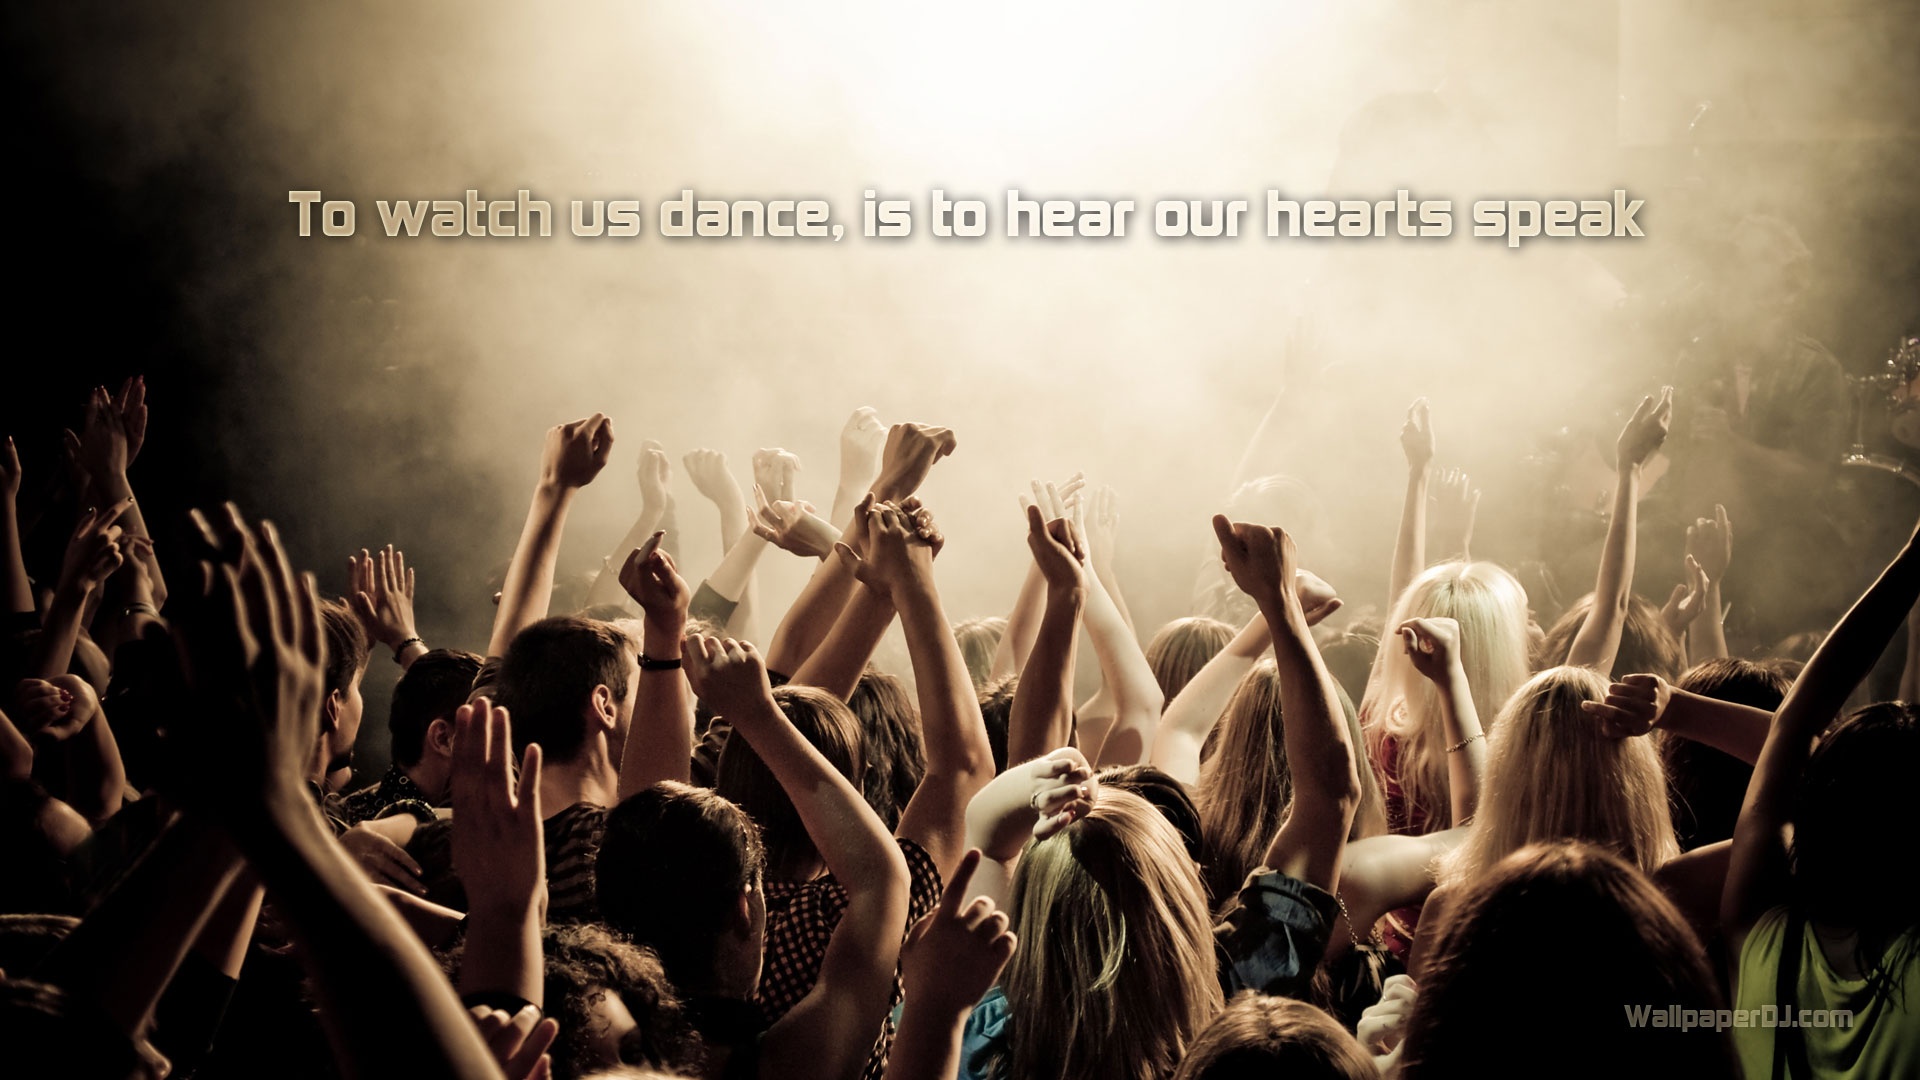 Hear Our Hearts Speak HD and Wide Wallpapers